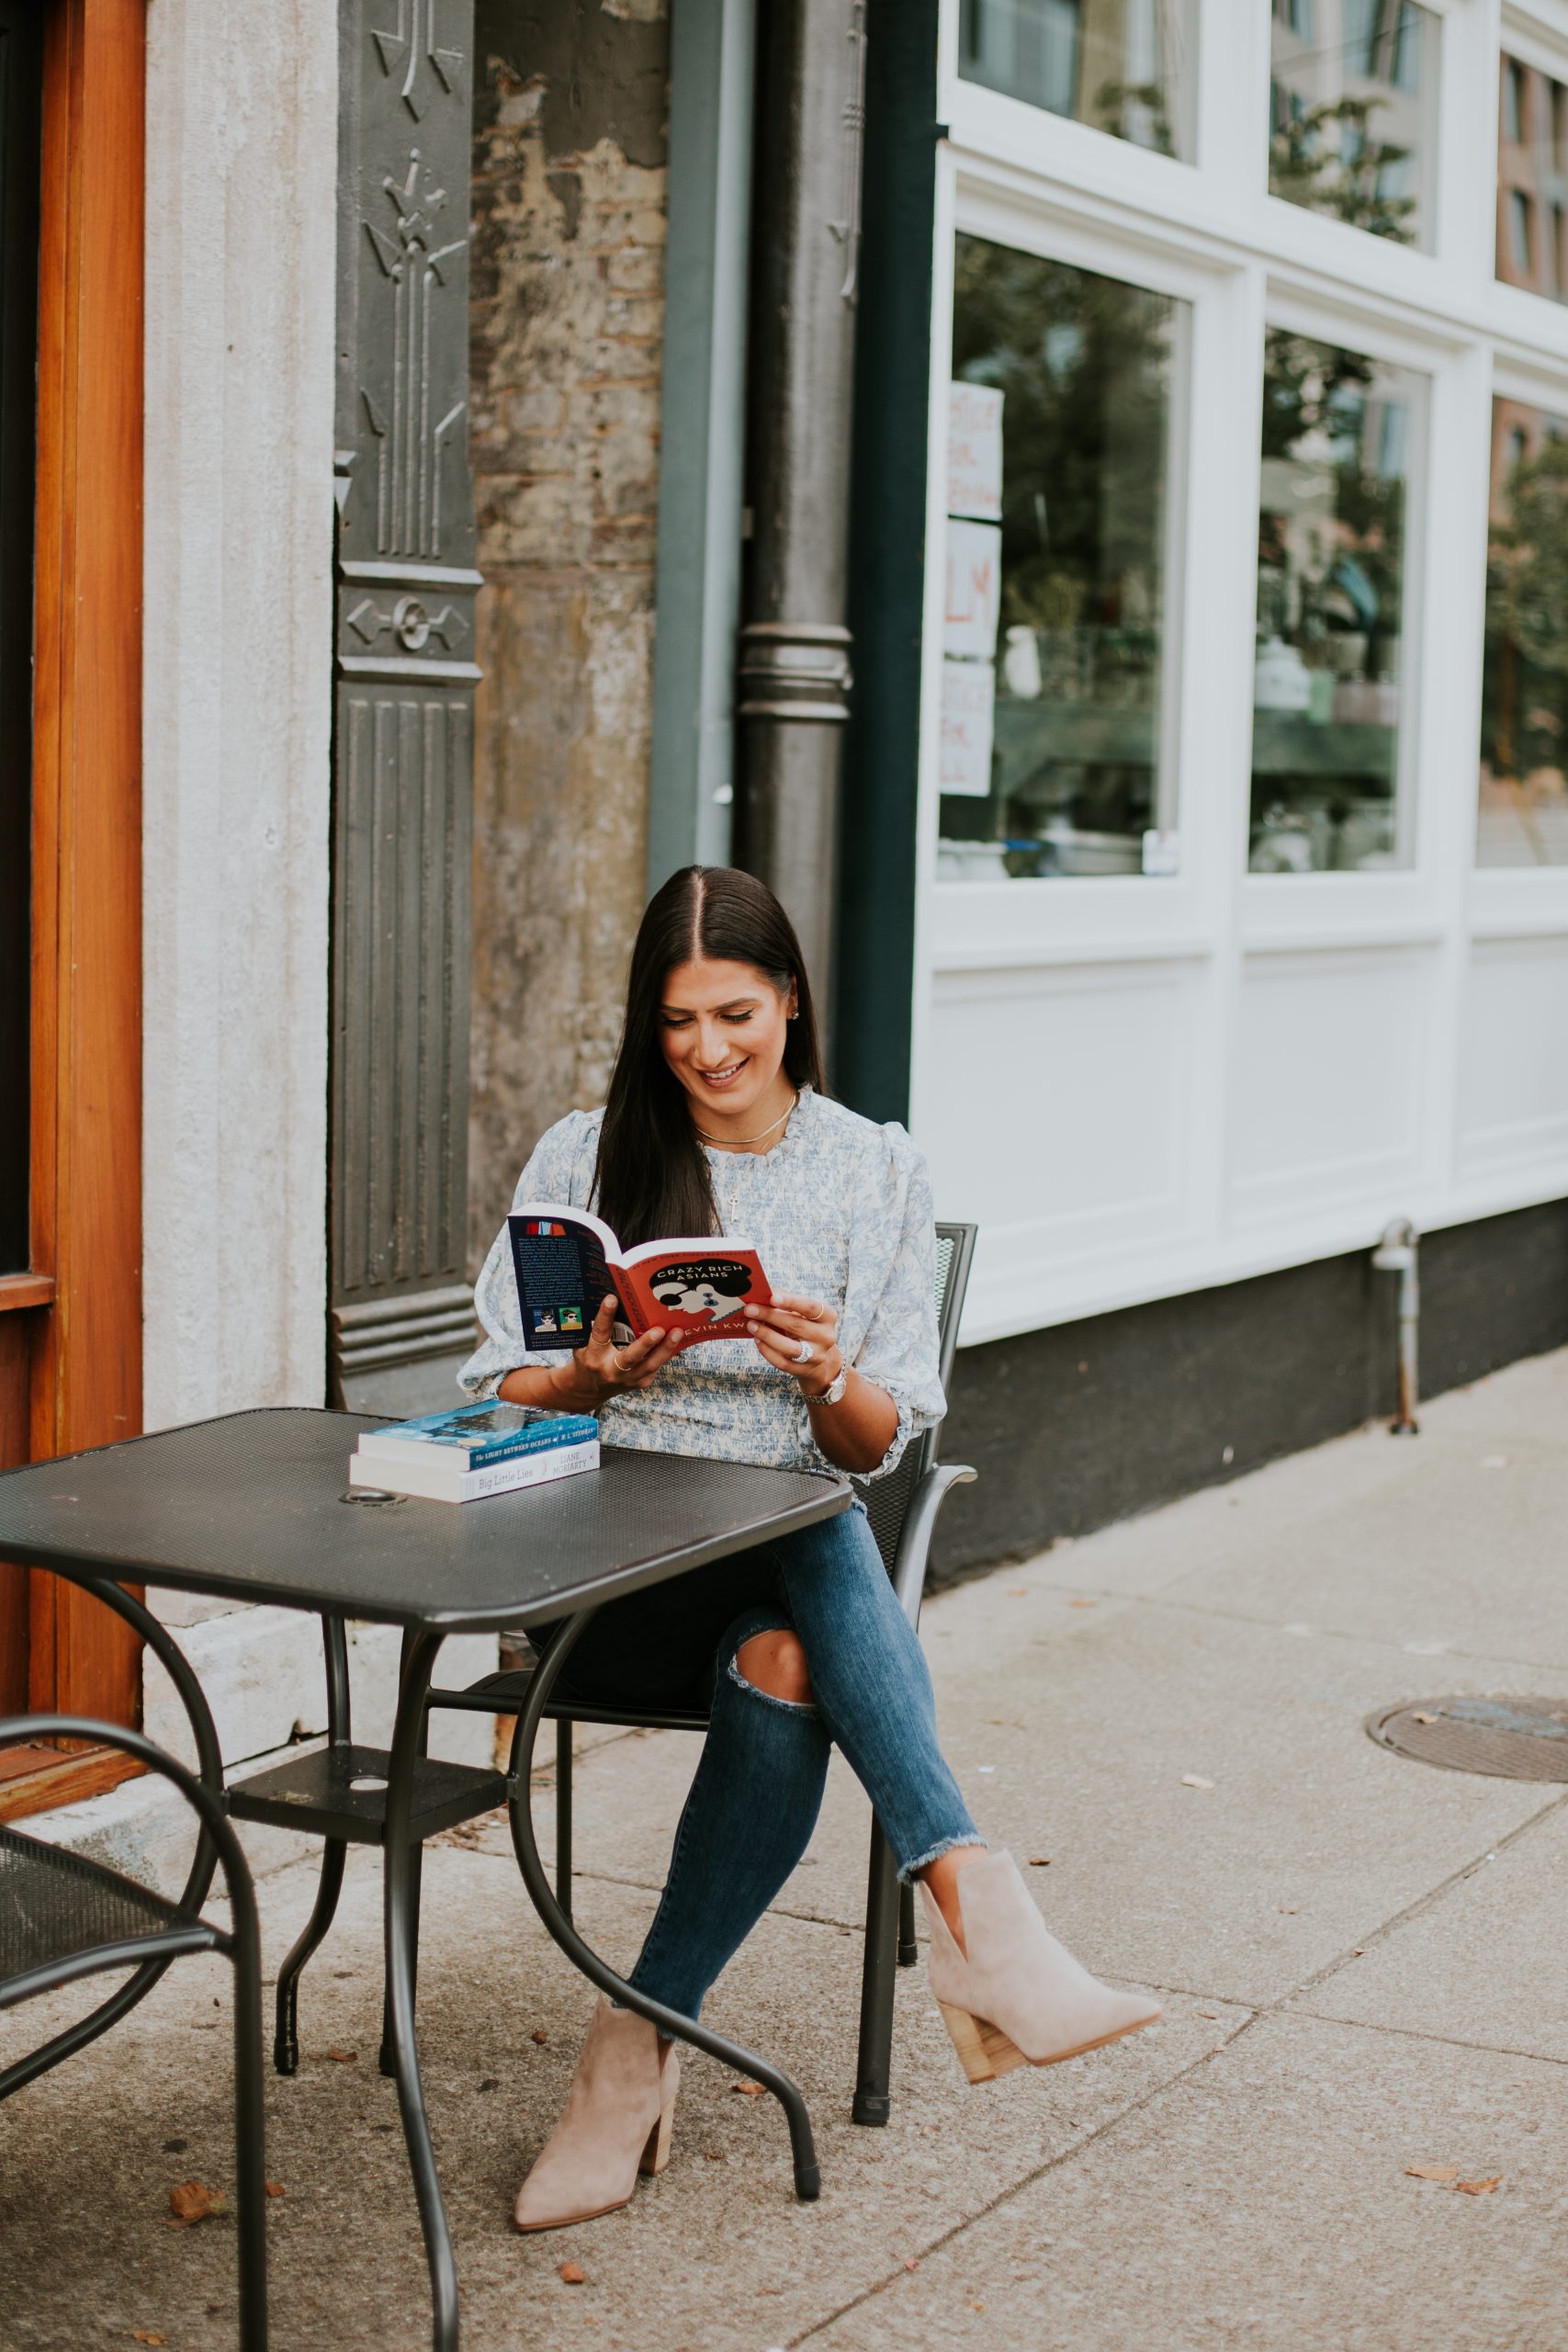 book review round 4, book reviews, what books to read, quarantine books to read, books to read, liane moriarty, crazy rich asians // grace white a southern drawl